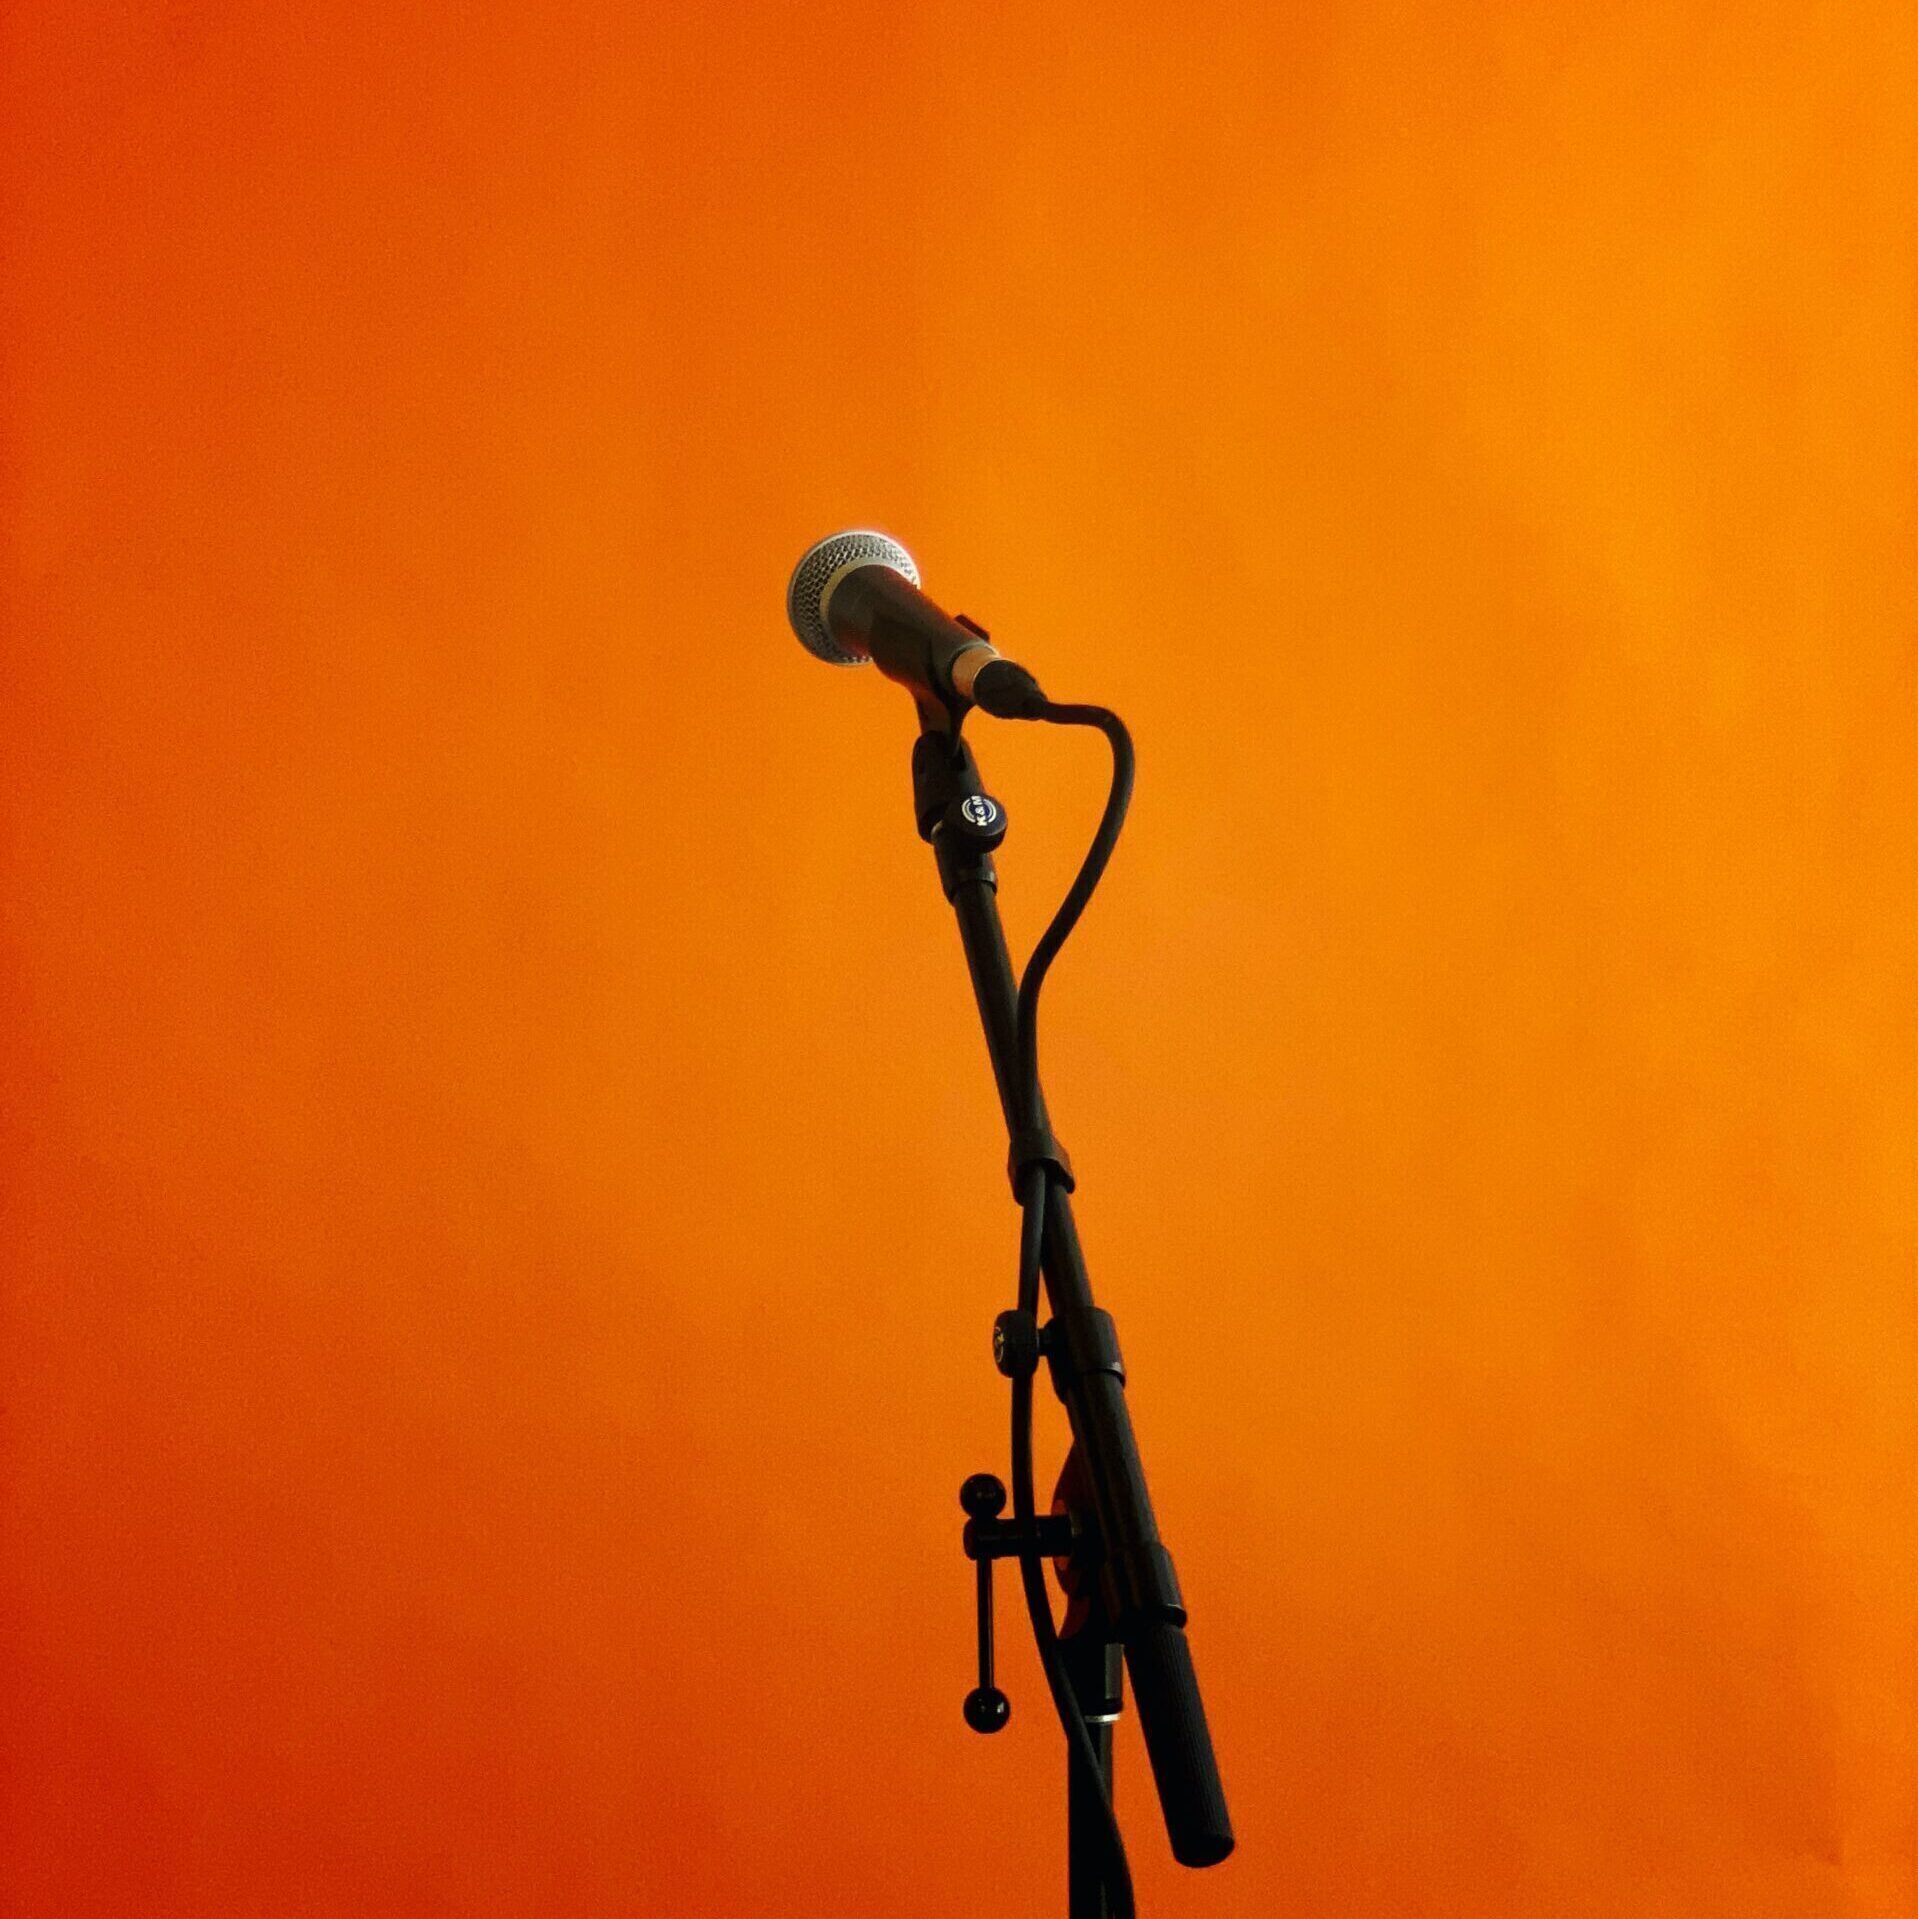 Black microphone and stand on orange background